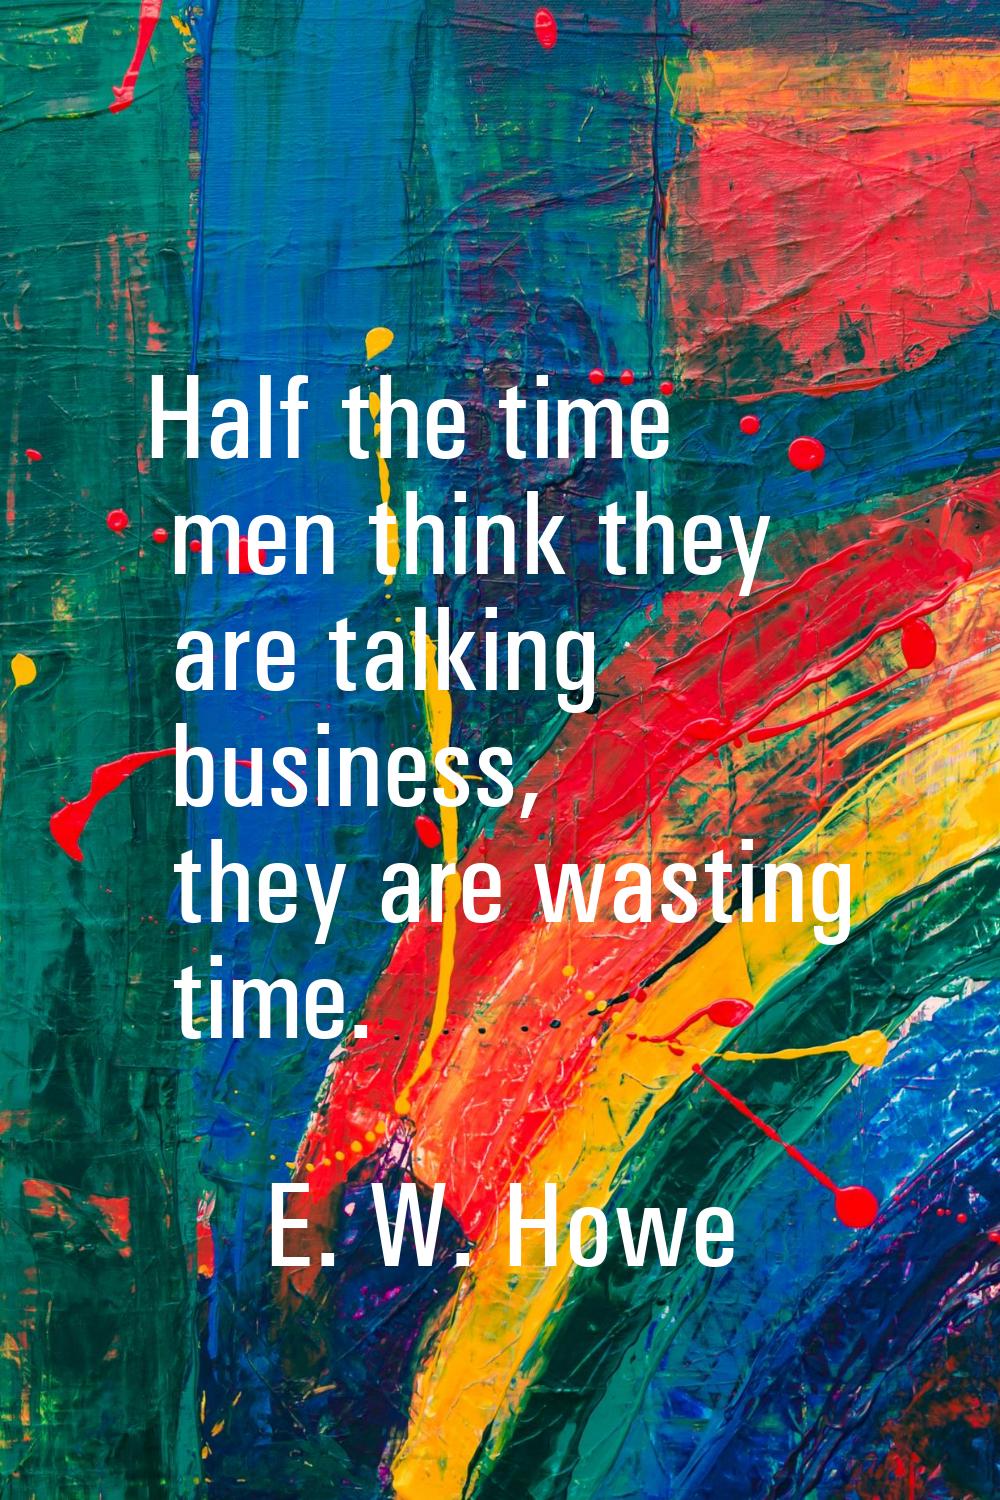 Half the time men think they are talking business, they are wasting time.